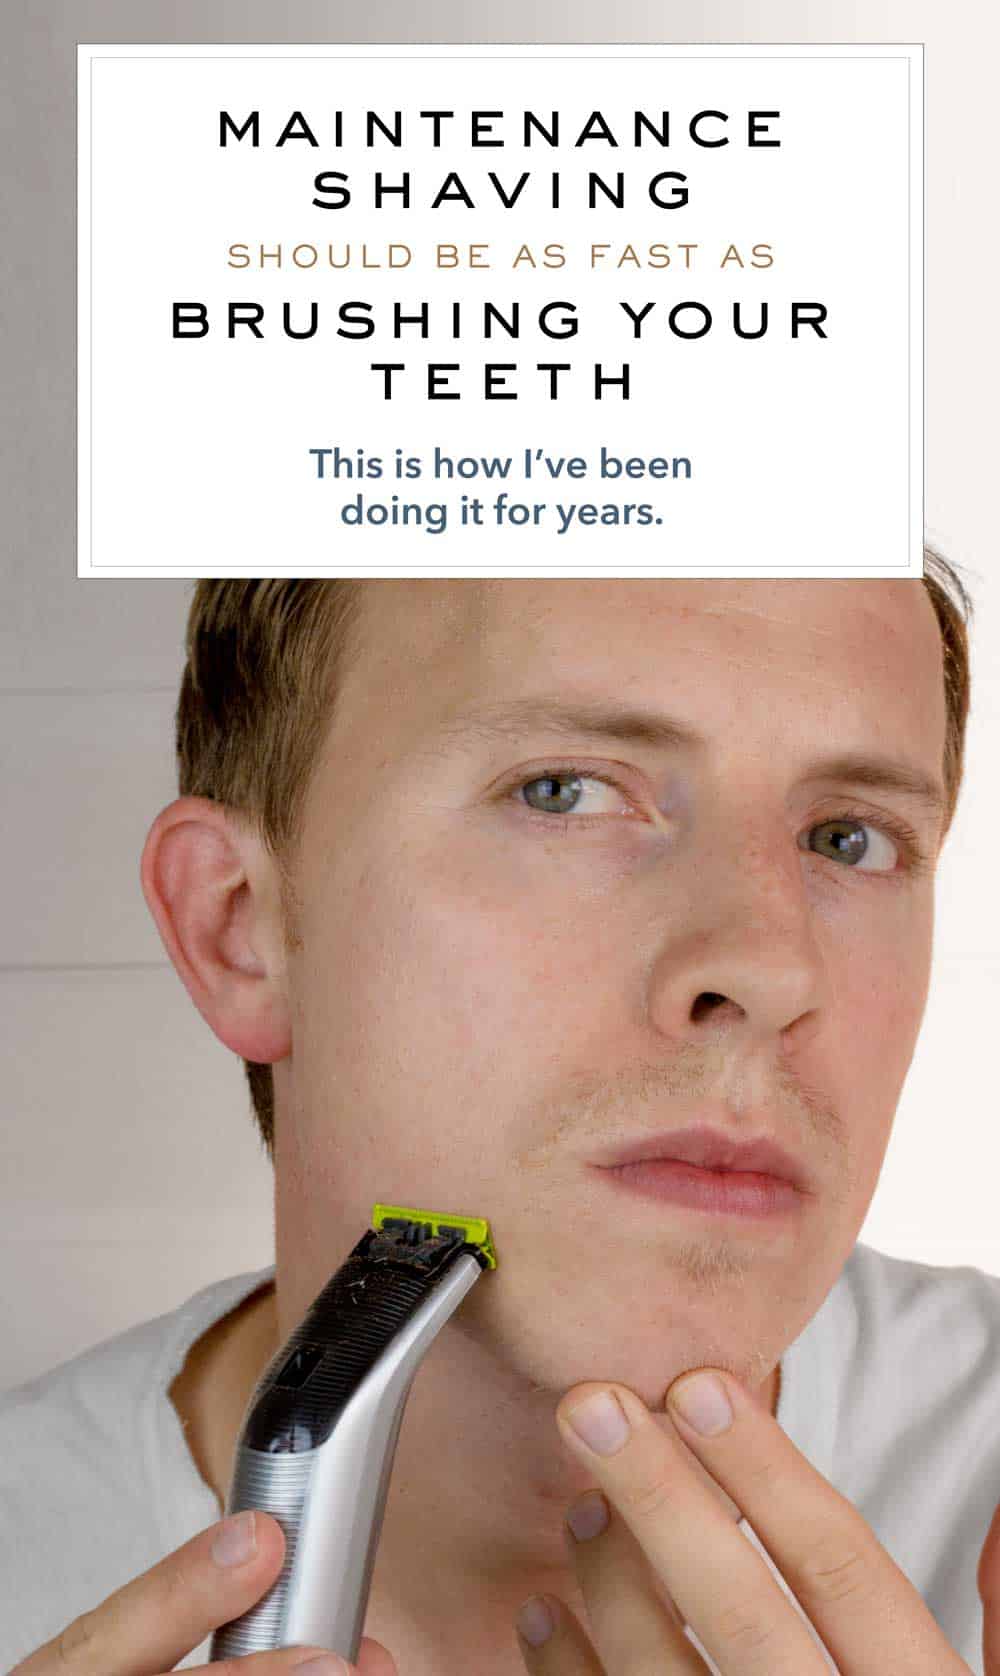 A man shaving in a mirror with article title